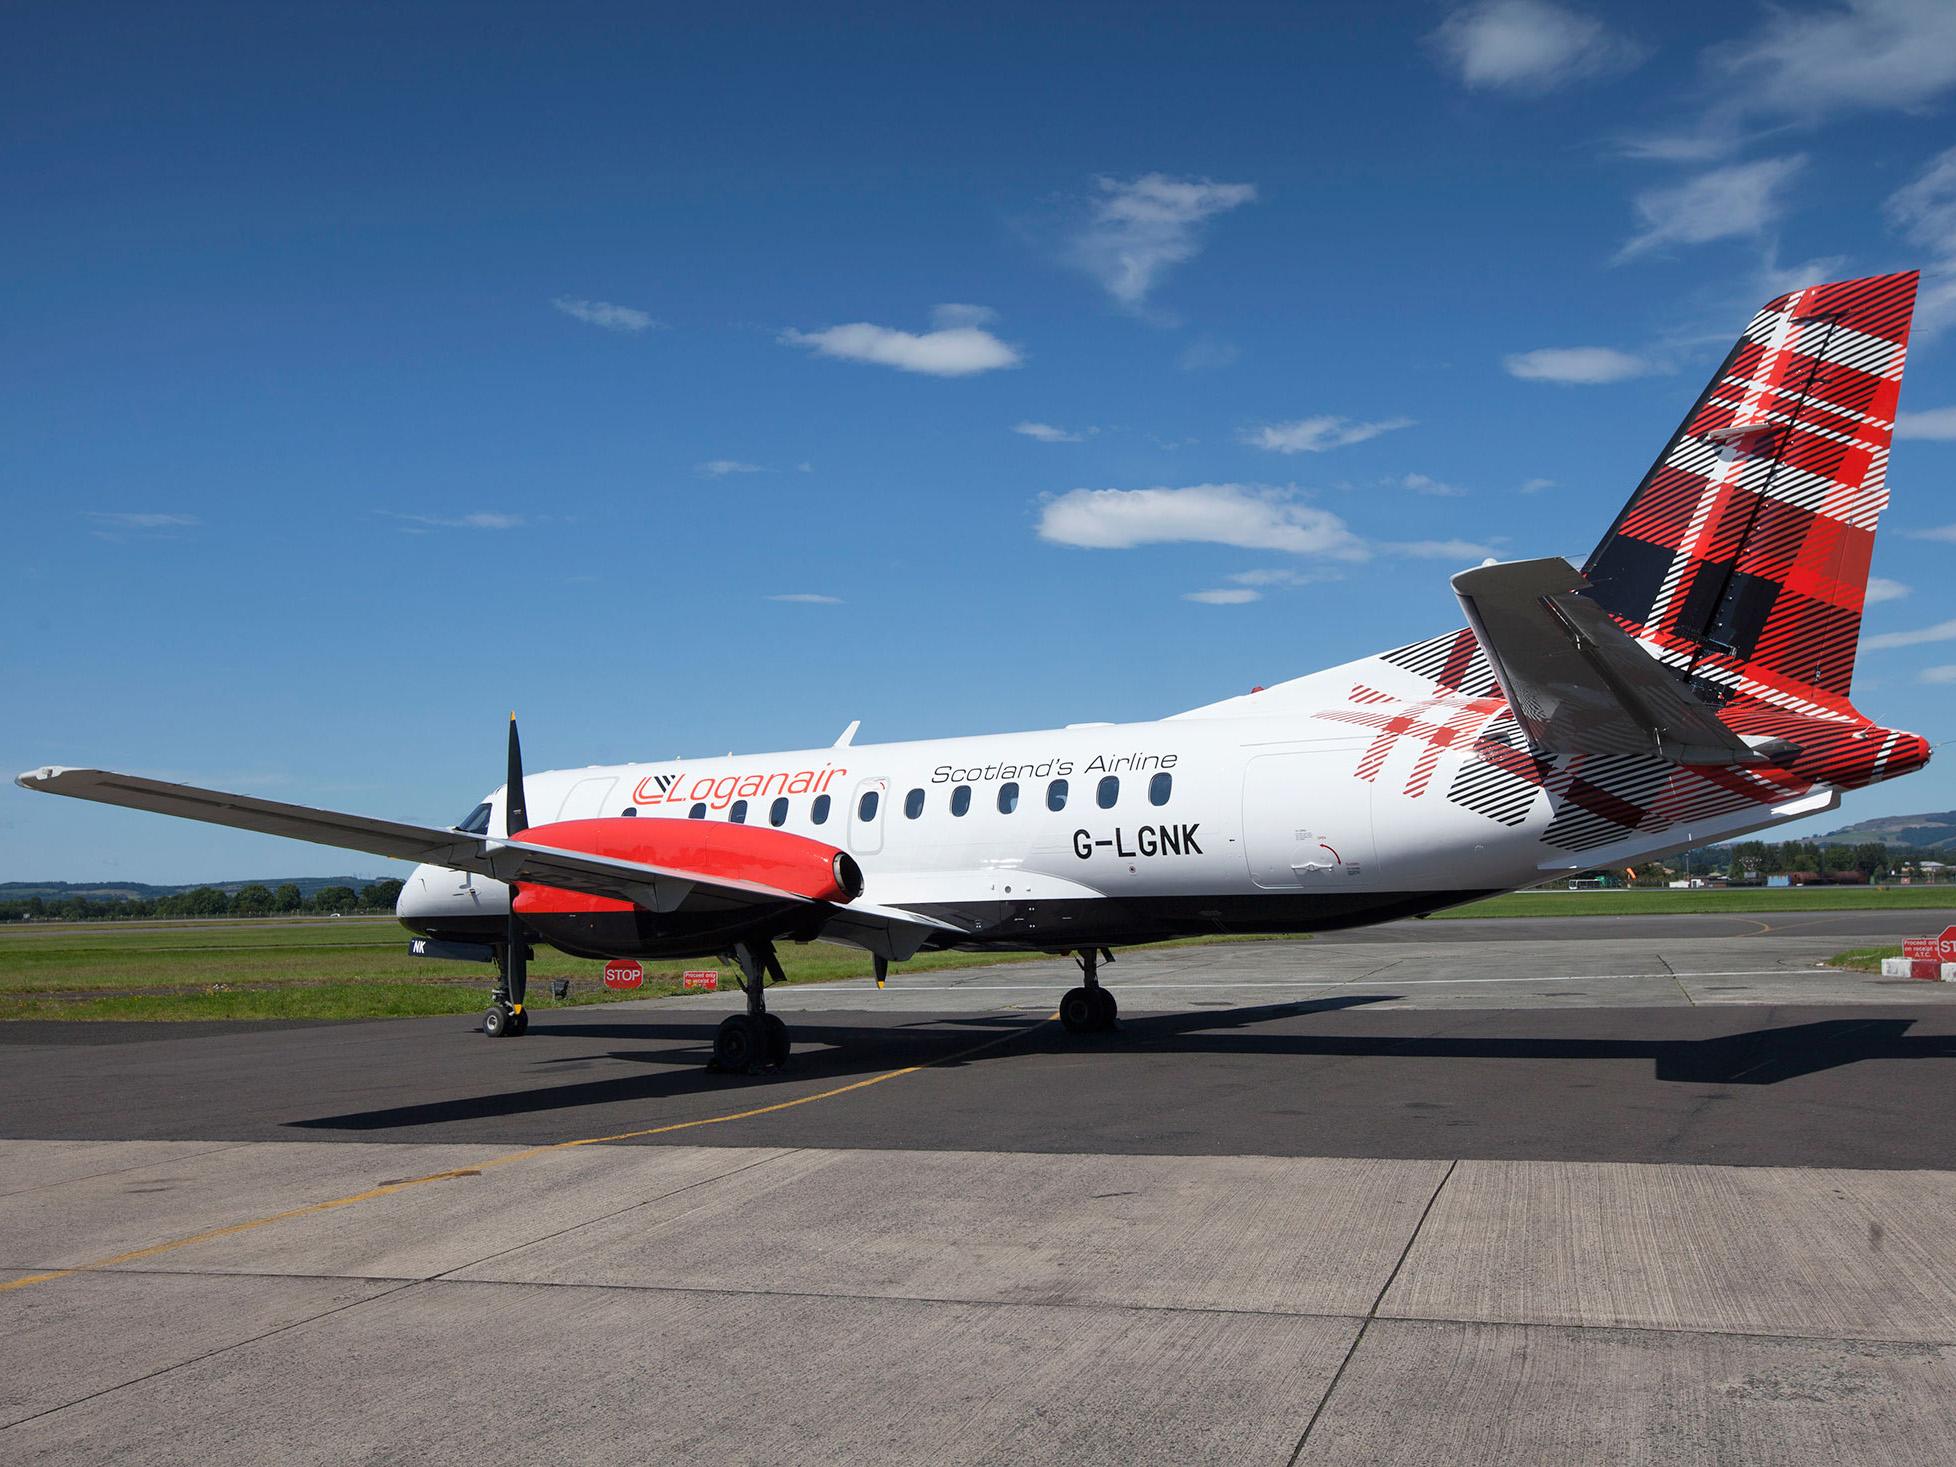 The Spirit of Caithness, Saab 340 aircraft, with the new livery